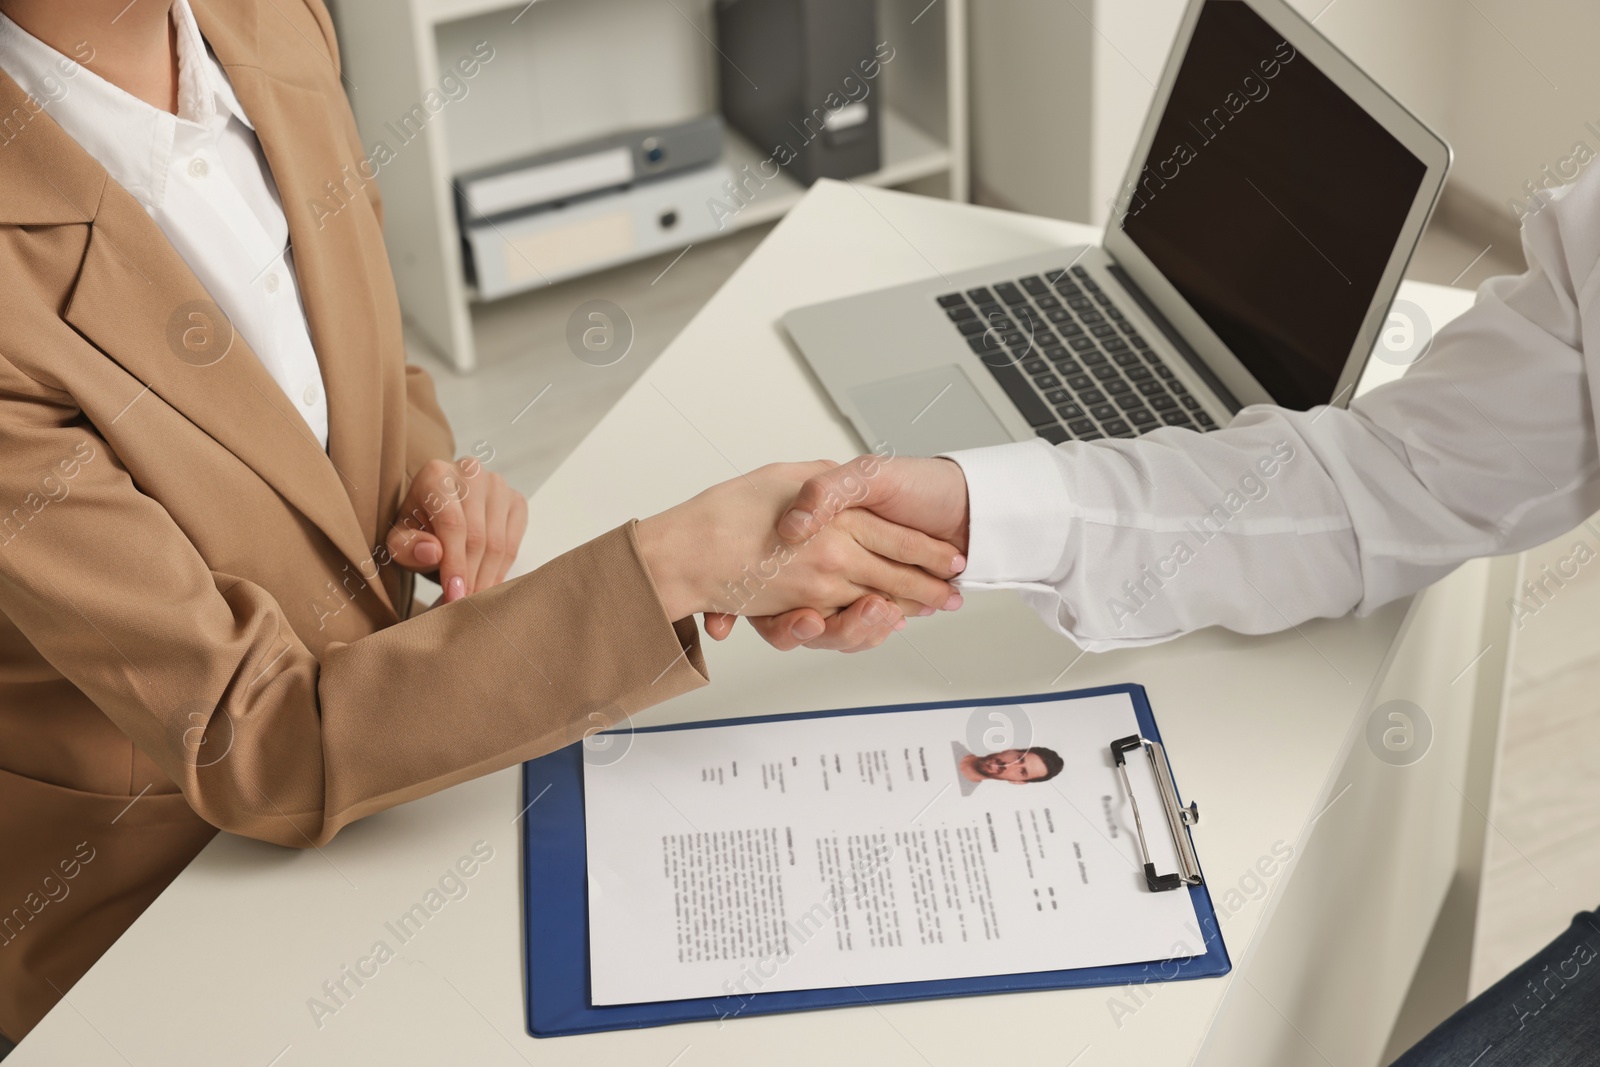 Photo of Human resources manager shaking hands with applicant during job interview in office, closeup